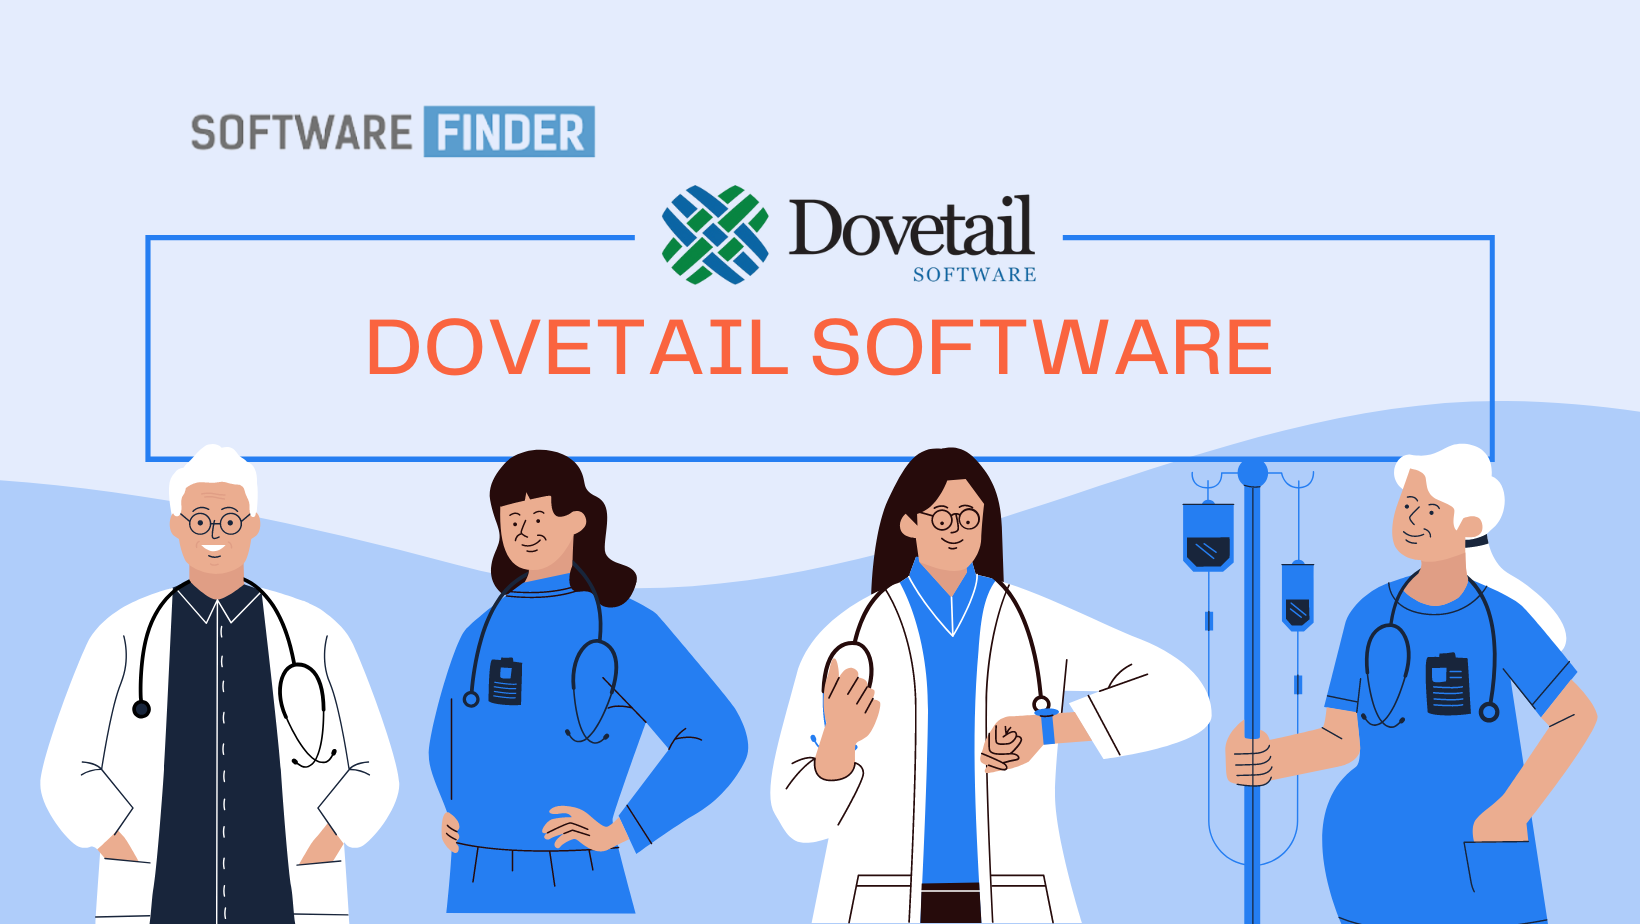 Dovetail software